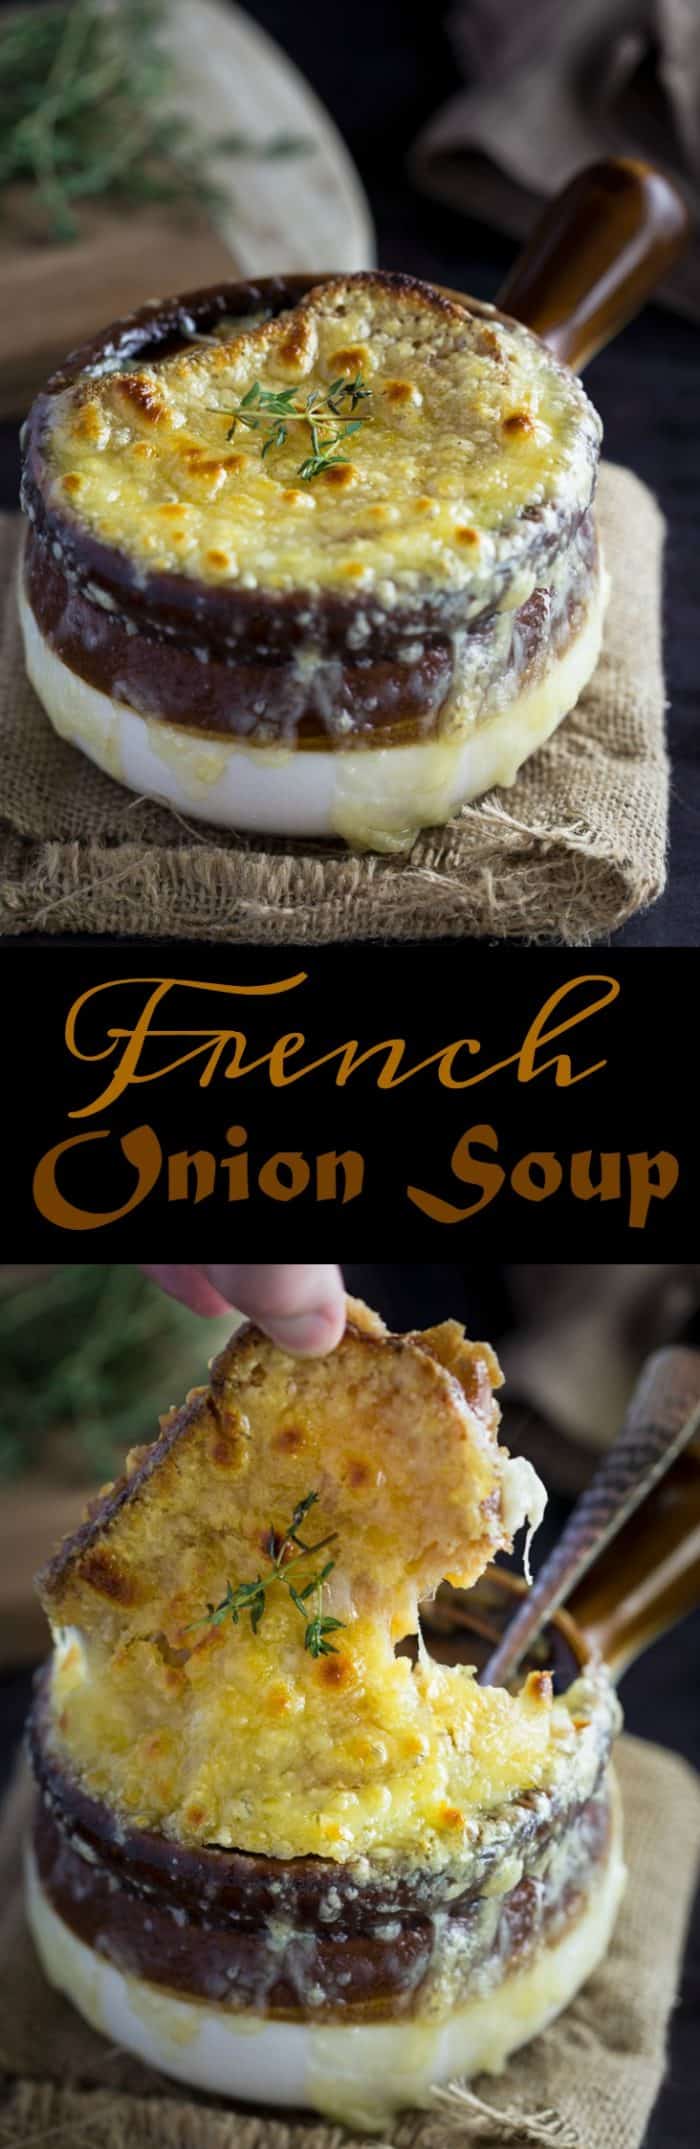 This classic French Onion Soup has a rich, silky broth made from thinly sliced onions, butter, white wine, beef broth, fresh thyme and bay leaves. All topped with a toasted baguette and hot, bubbly Gruyere cheese. | The Cozy Cook | #soup #frenchonionsoup #onions #recipe #easyrecipes #winterrecipes #gruyere